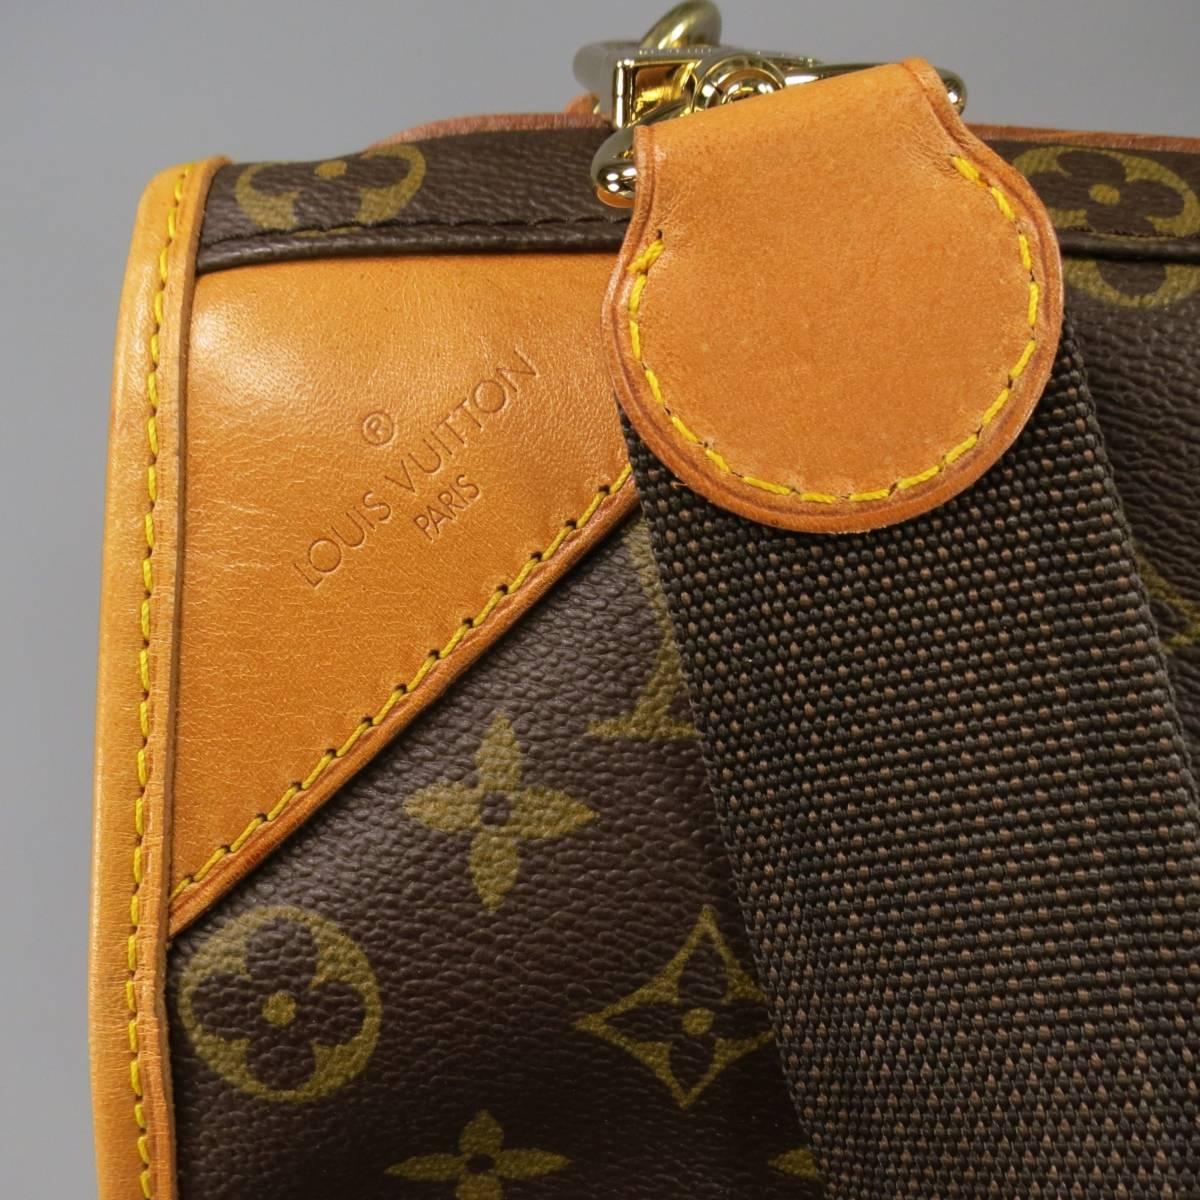 Classic brown garment bag circa 2005 by LOUIS VUITTON. In signature monogram brown printed canvas, featuring tan leather details, top handles, detachable strap, and internal garment bag. A suitcase/garment classic bag . Luggage tag included. Wear